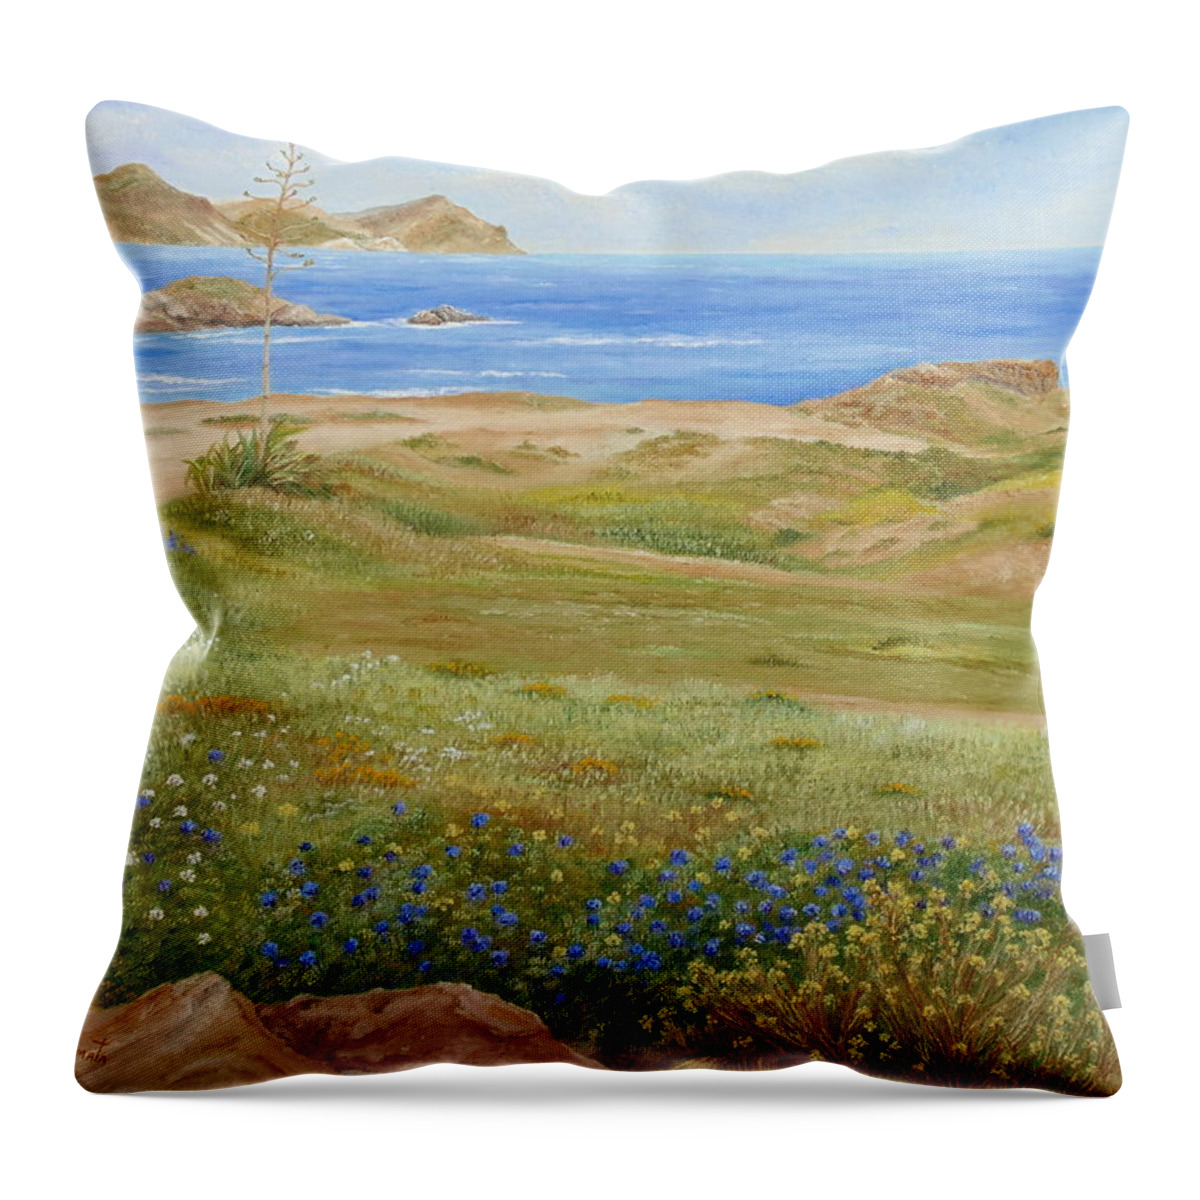 Wild Flowers Throw Pillow featuring the painting Wild Flowers by Angeles M Pomata